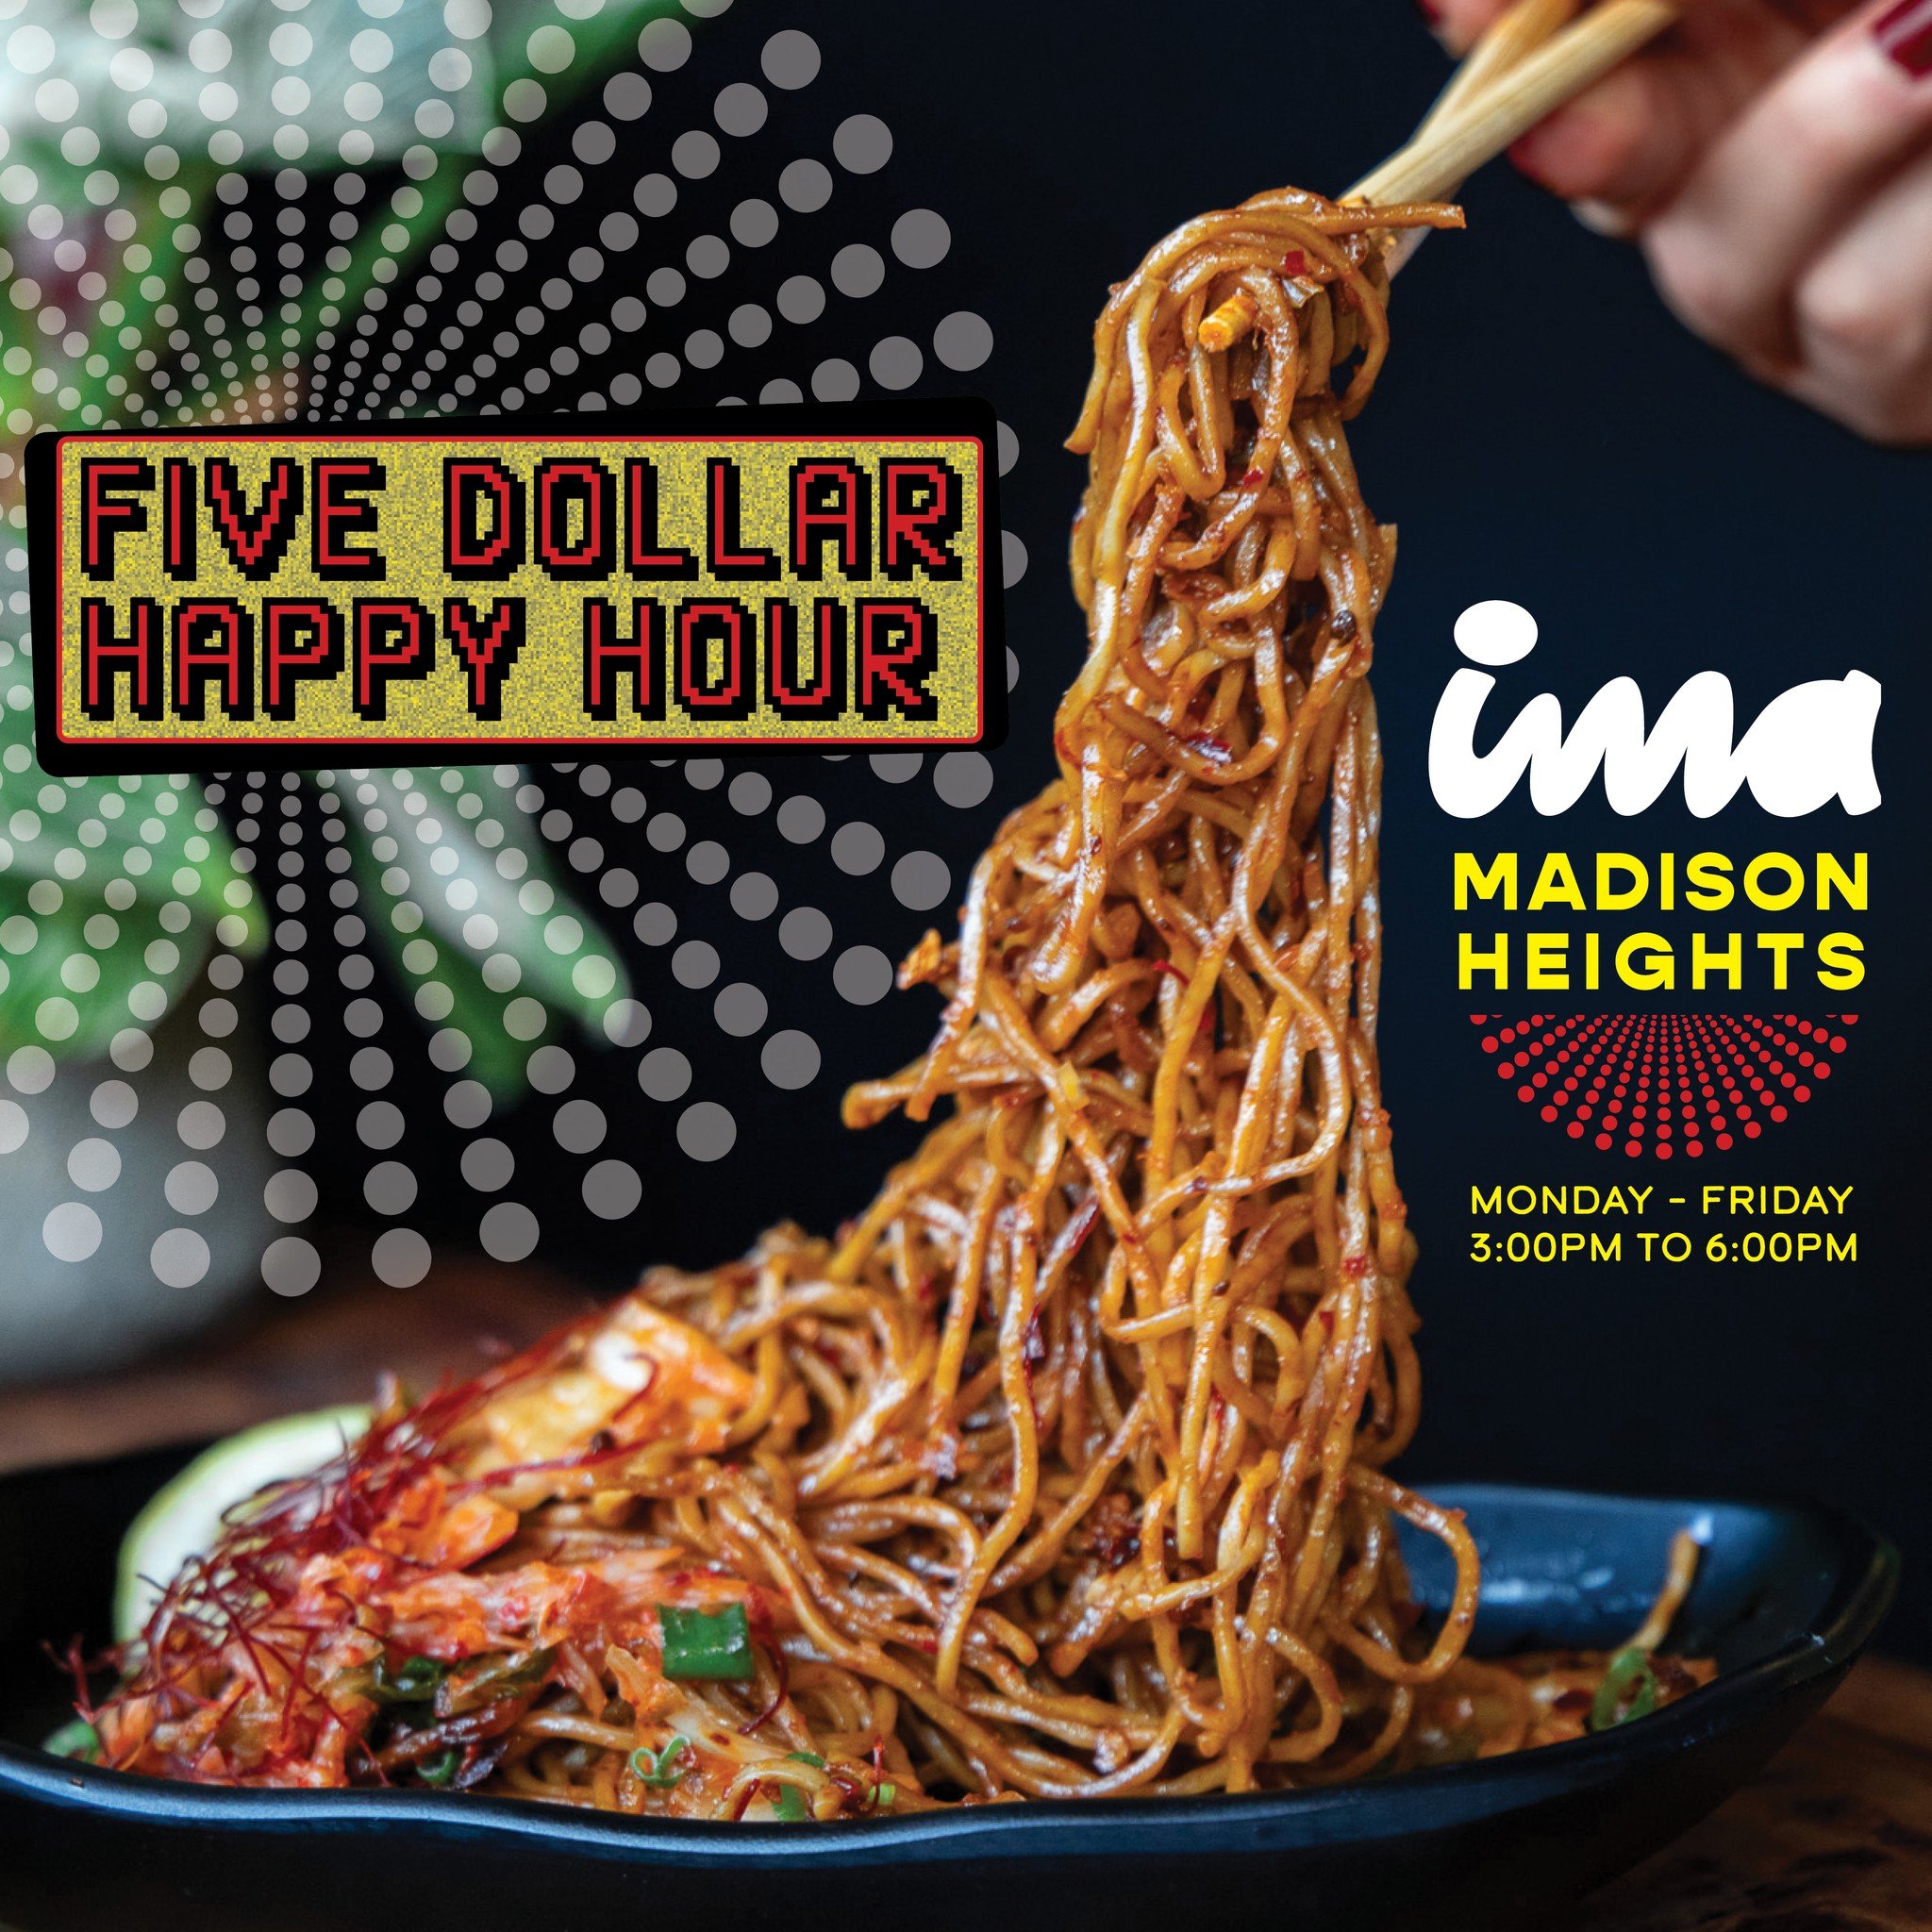 Starting TOMORROW in Madison Heights! Join us from 3pm to 6pm for a special menu of $5 food and drinks!